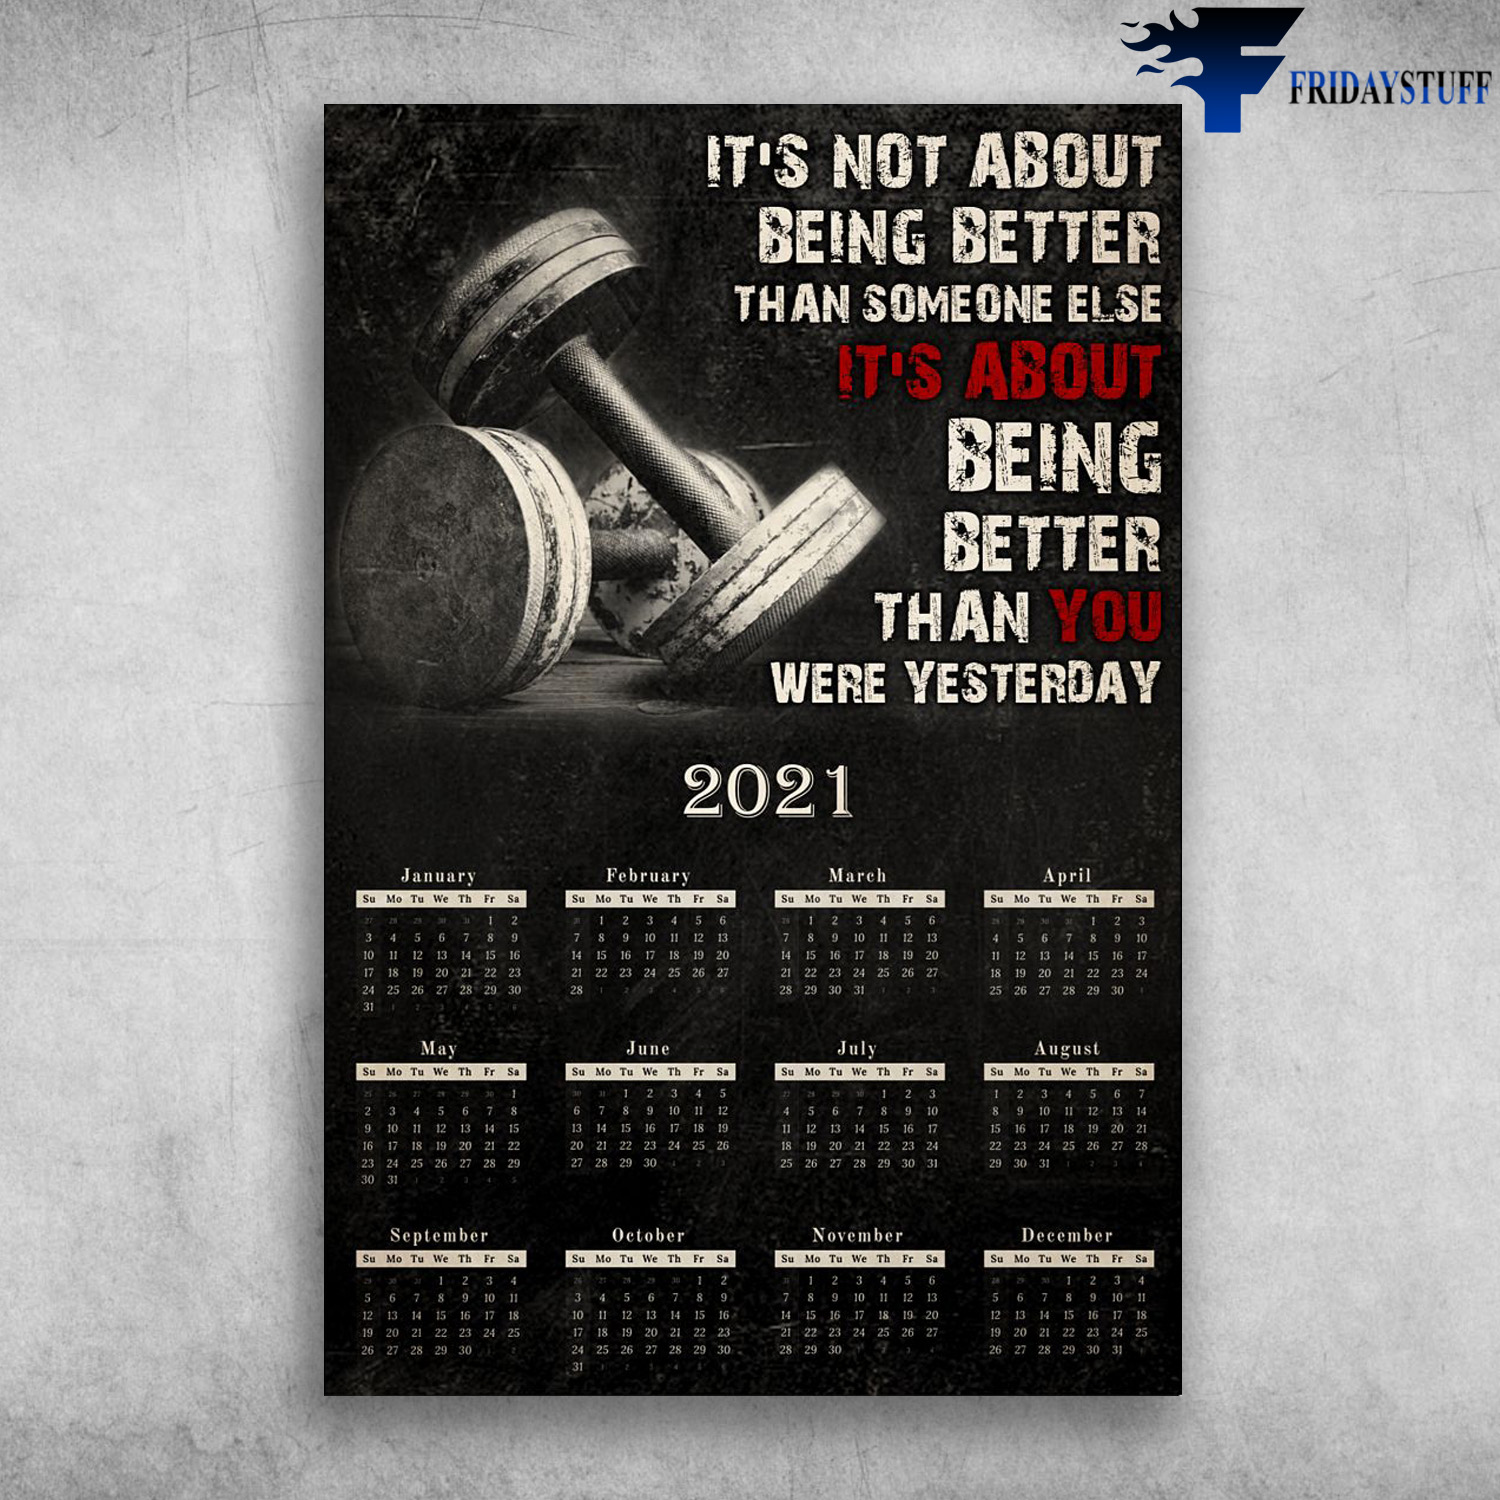 Dumbbell Calendar - It's Not About Being Better Than Some Else, It's About Being Better Than You Were Yesterday